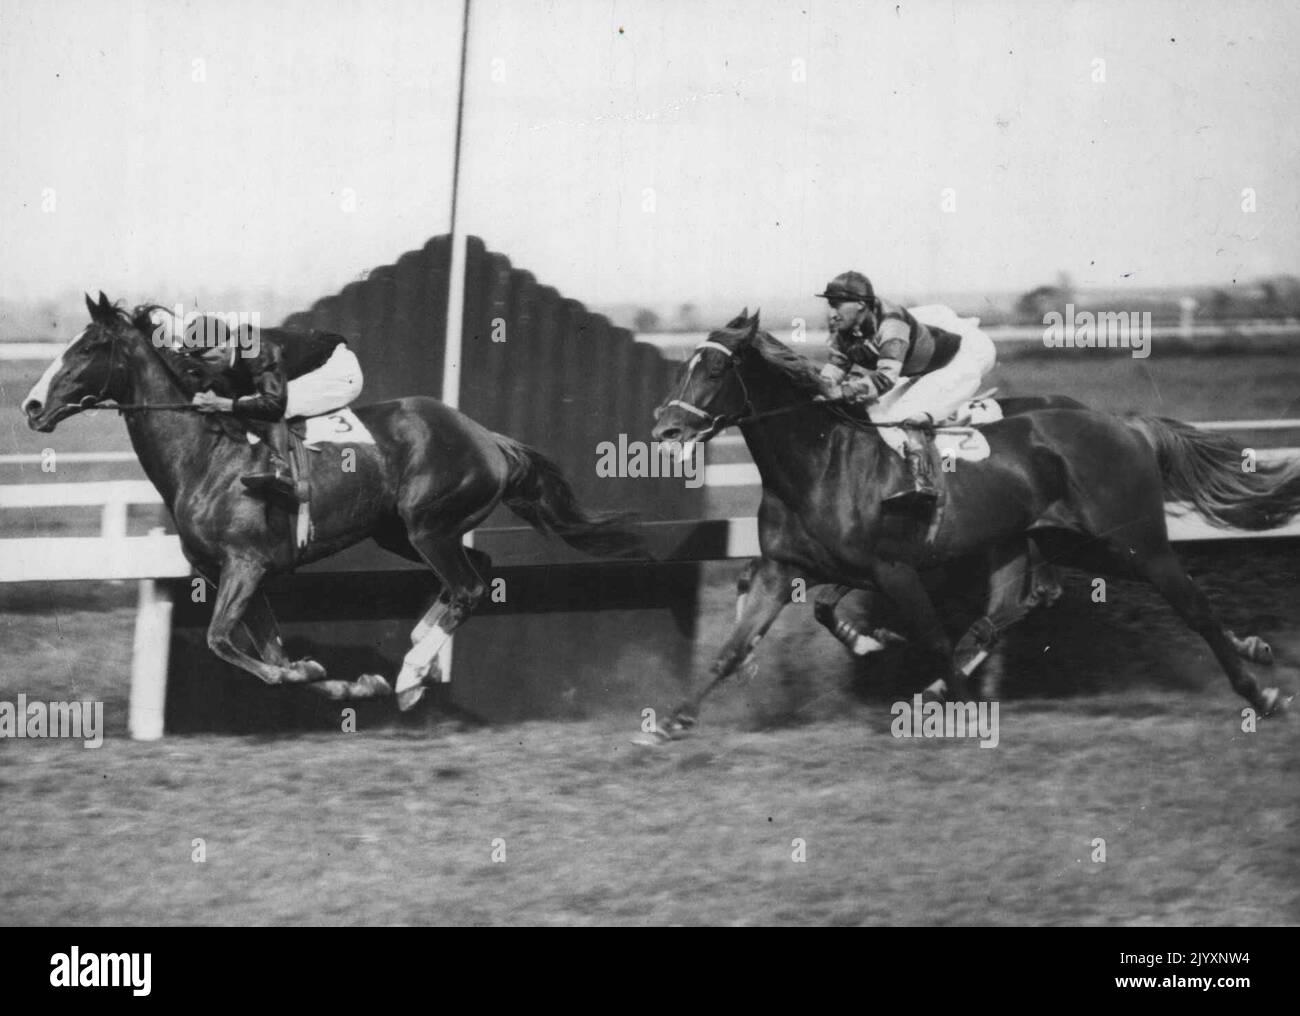 Rogilla wins at Rosehill. Former champion Rogilla, ridden by Darby Munro, goes past the post with all four feet off the ground in winning at Rosehill. Rogilla, ridden by Darby Munro, goes past the post with all four feet off the ground in winning at Rosehill. March 17, 1934. Stock Photo